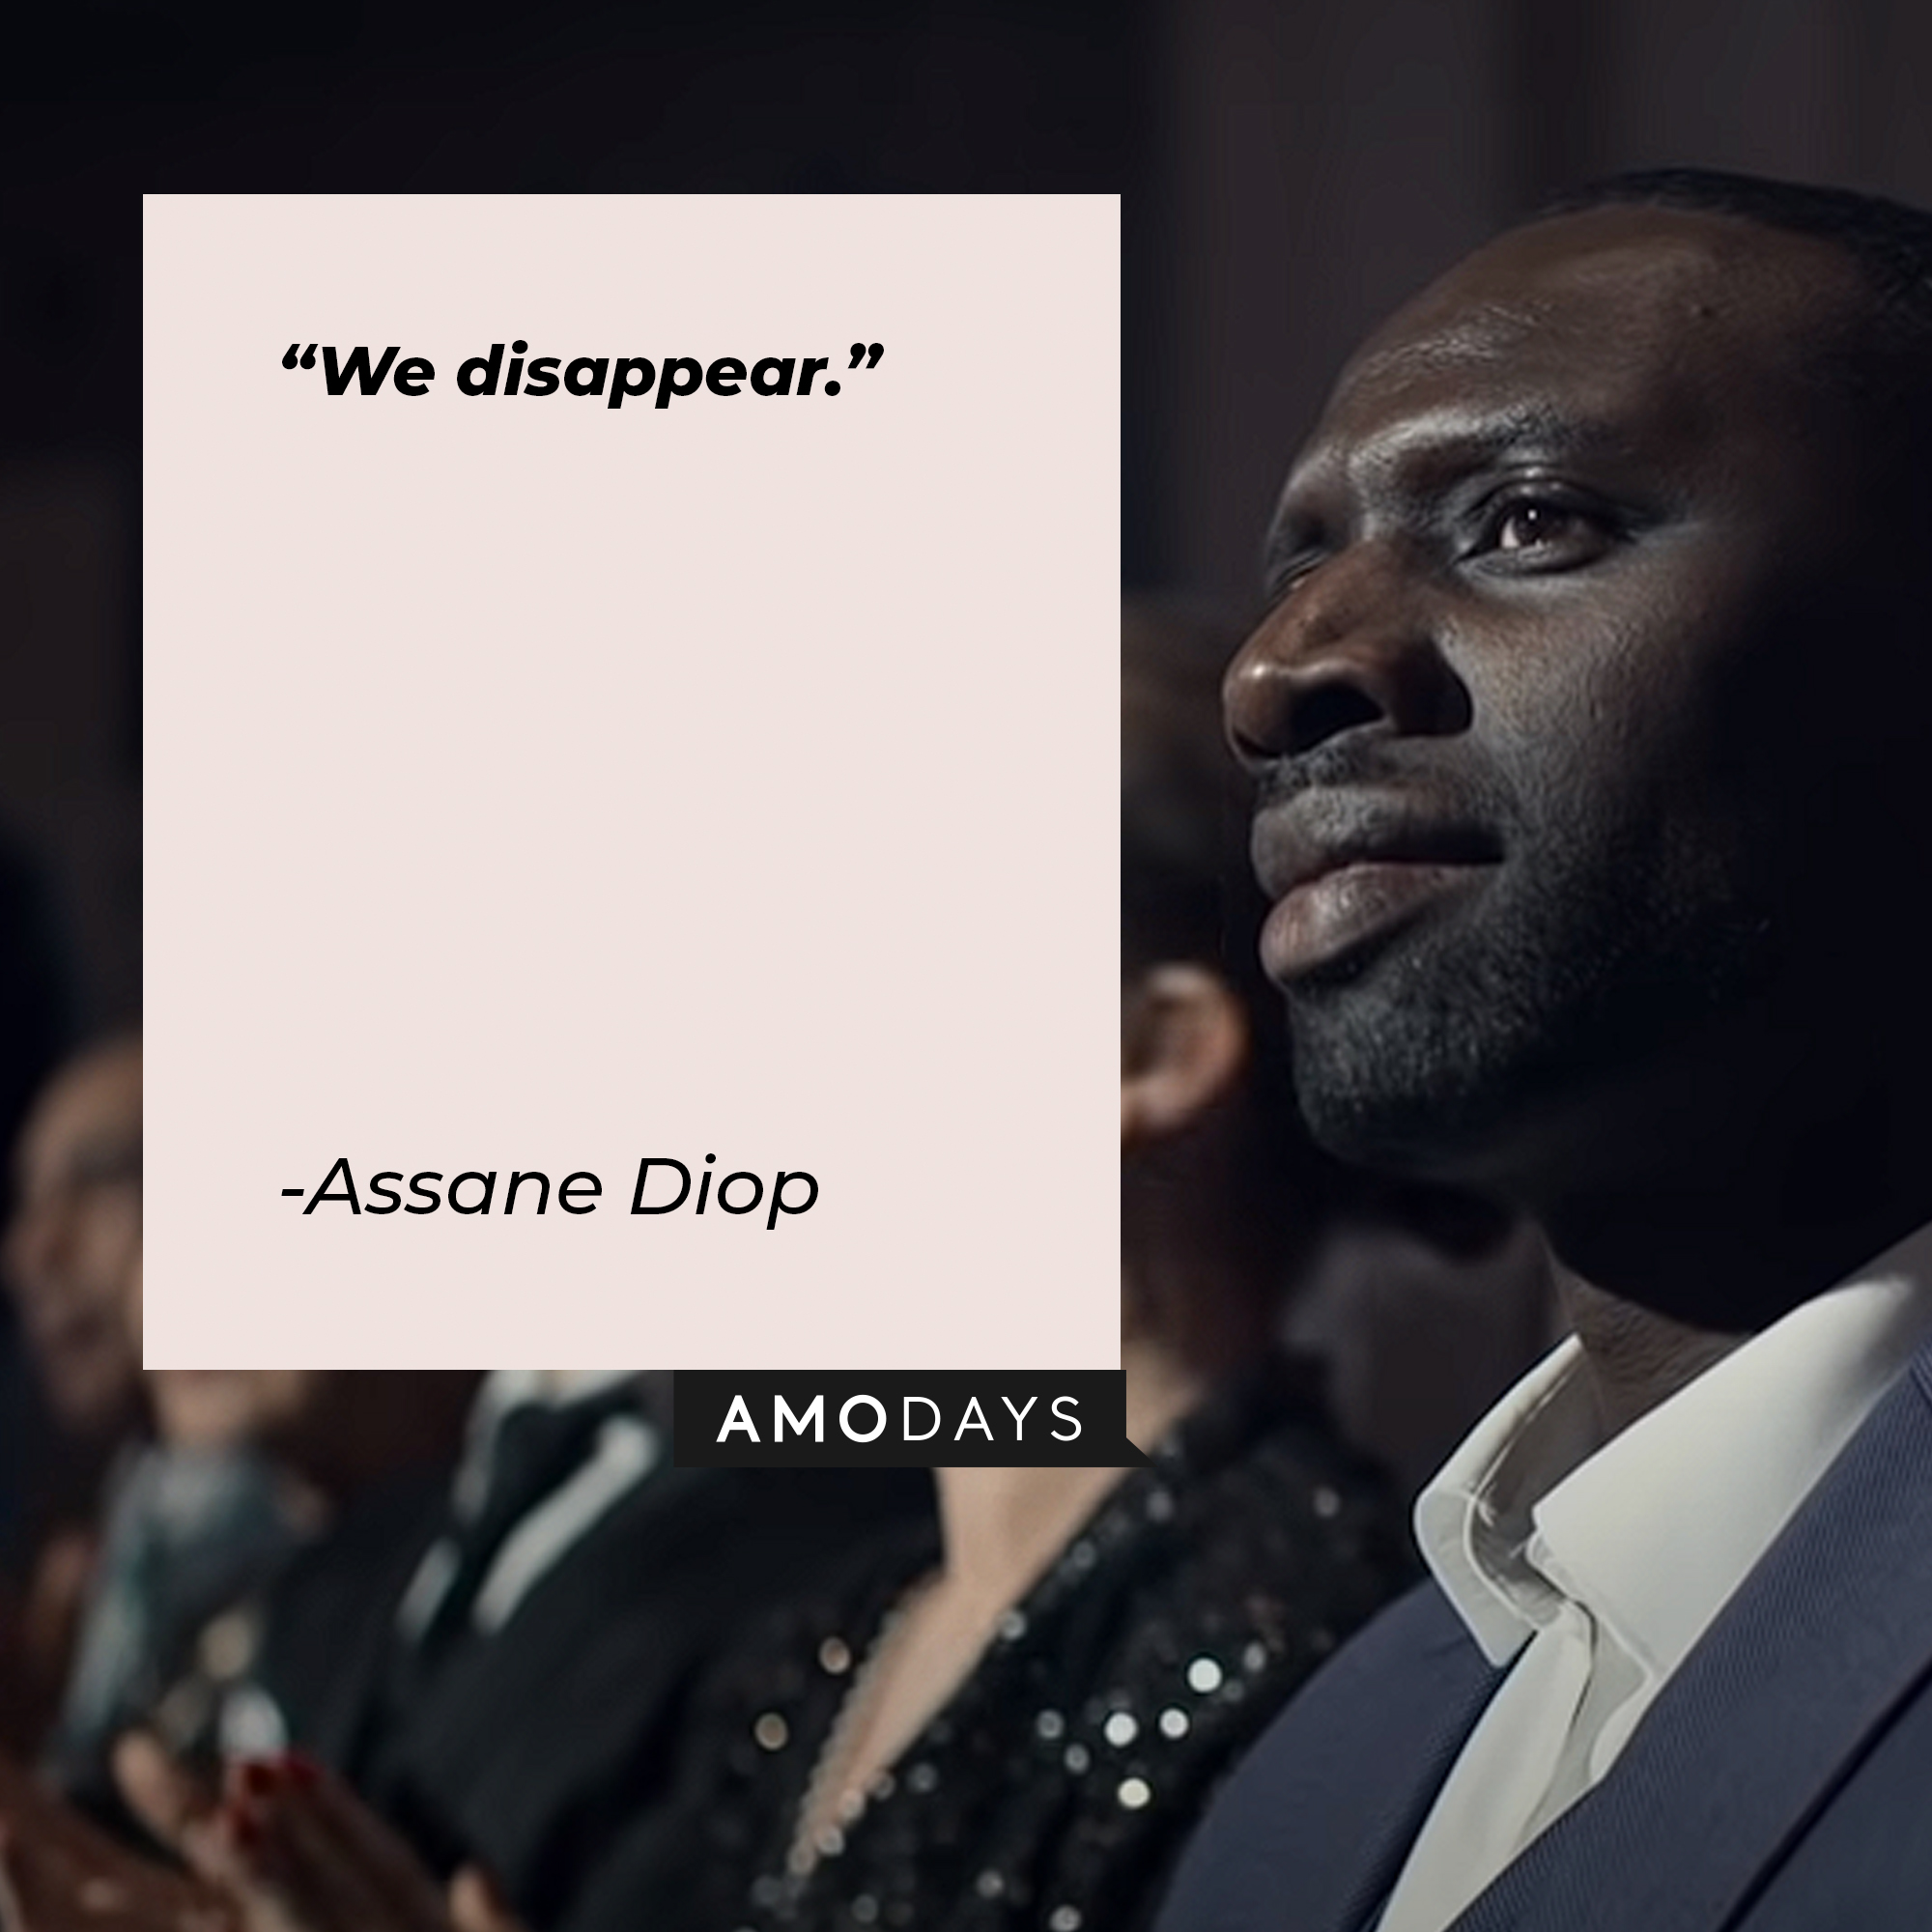 Assane Diop's quote: "We disappear." | Image: Amodays